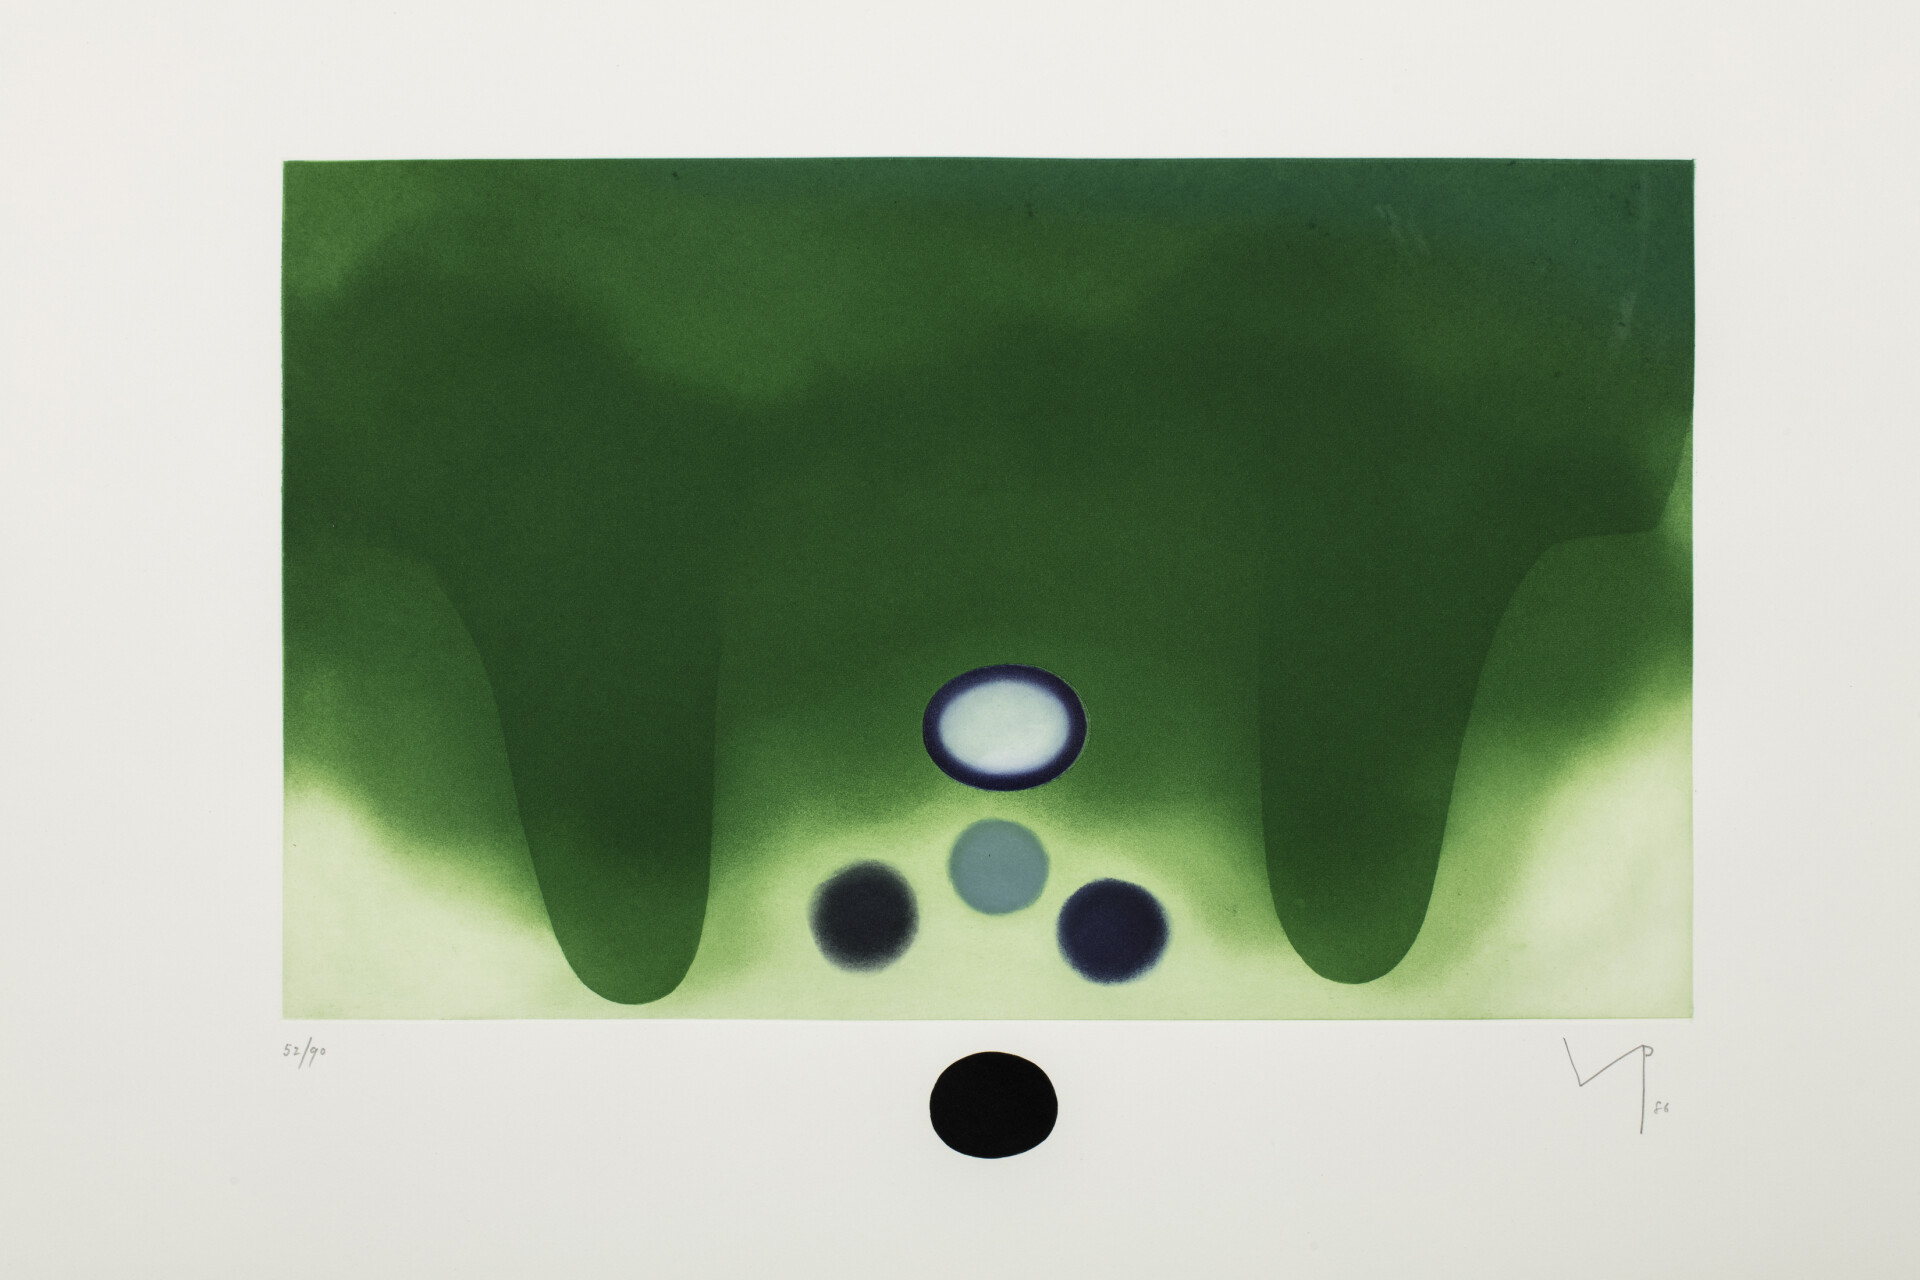 Victor Pasmore, Green Darkness, 1986, etching and aquatint, edition of 90,  65 x 93 cm